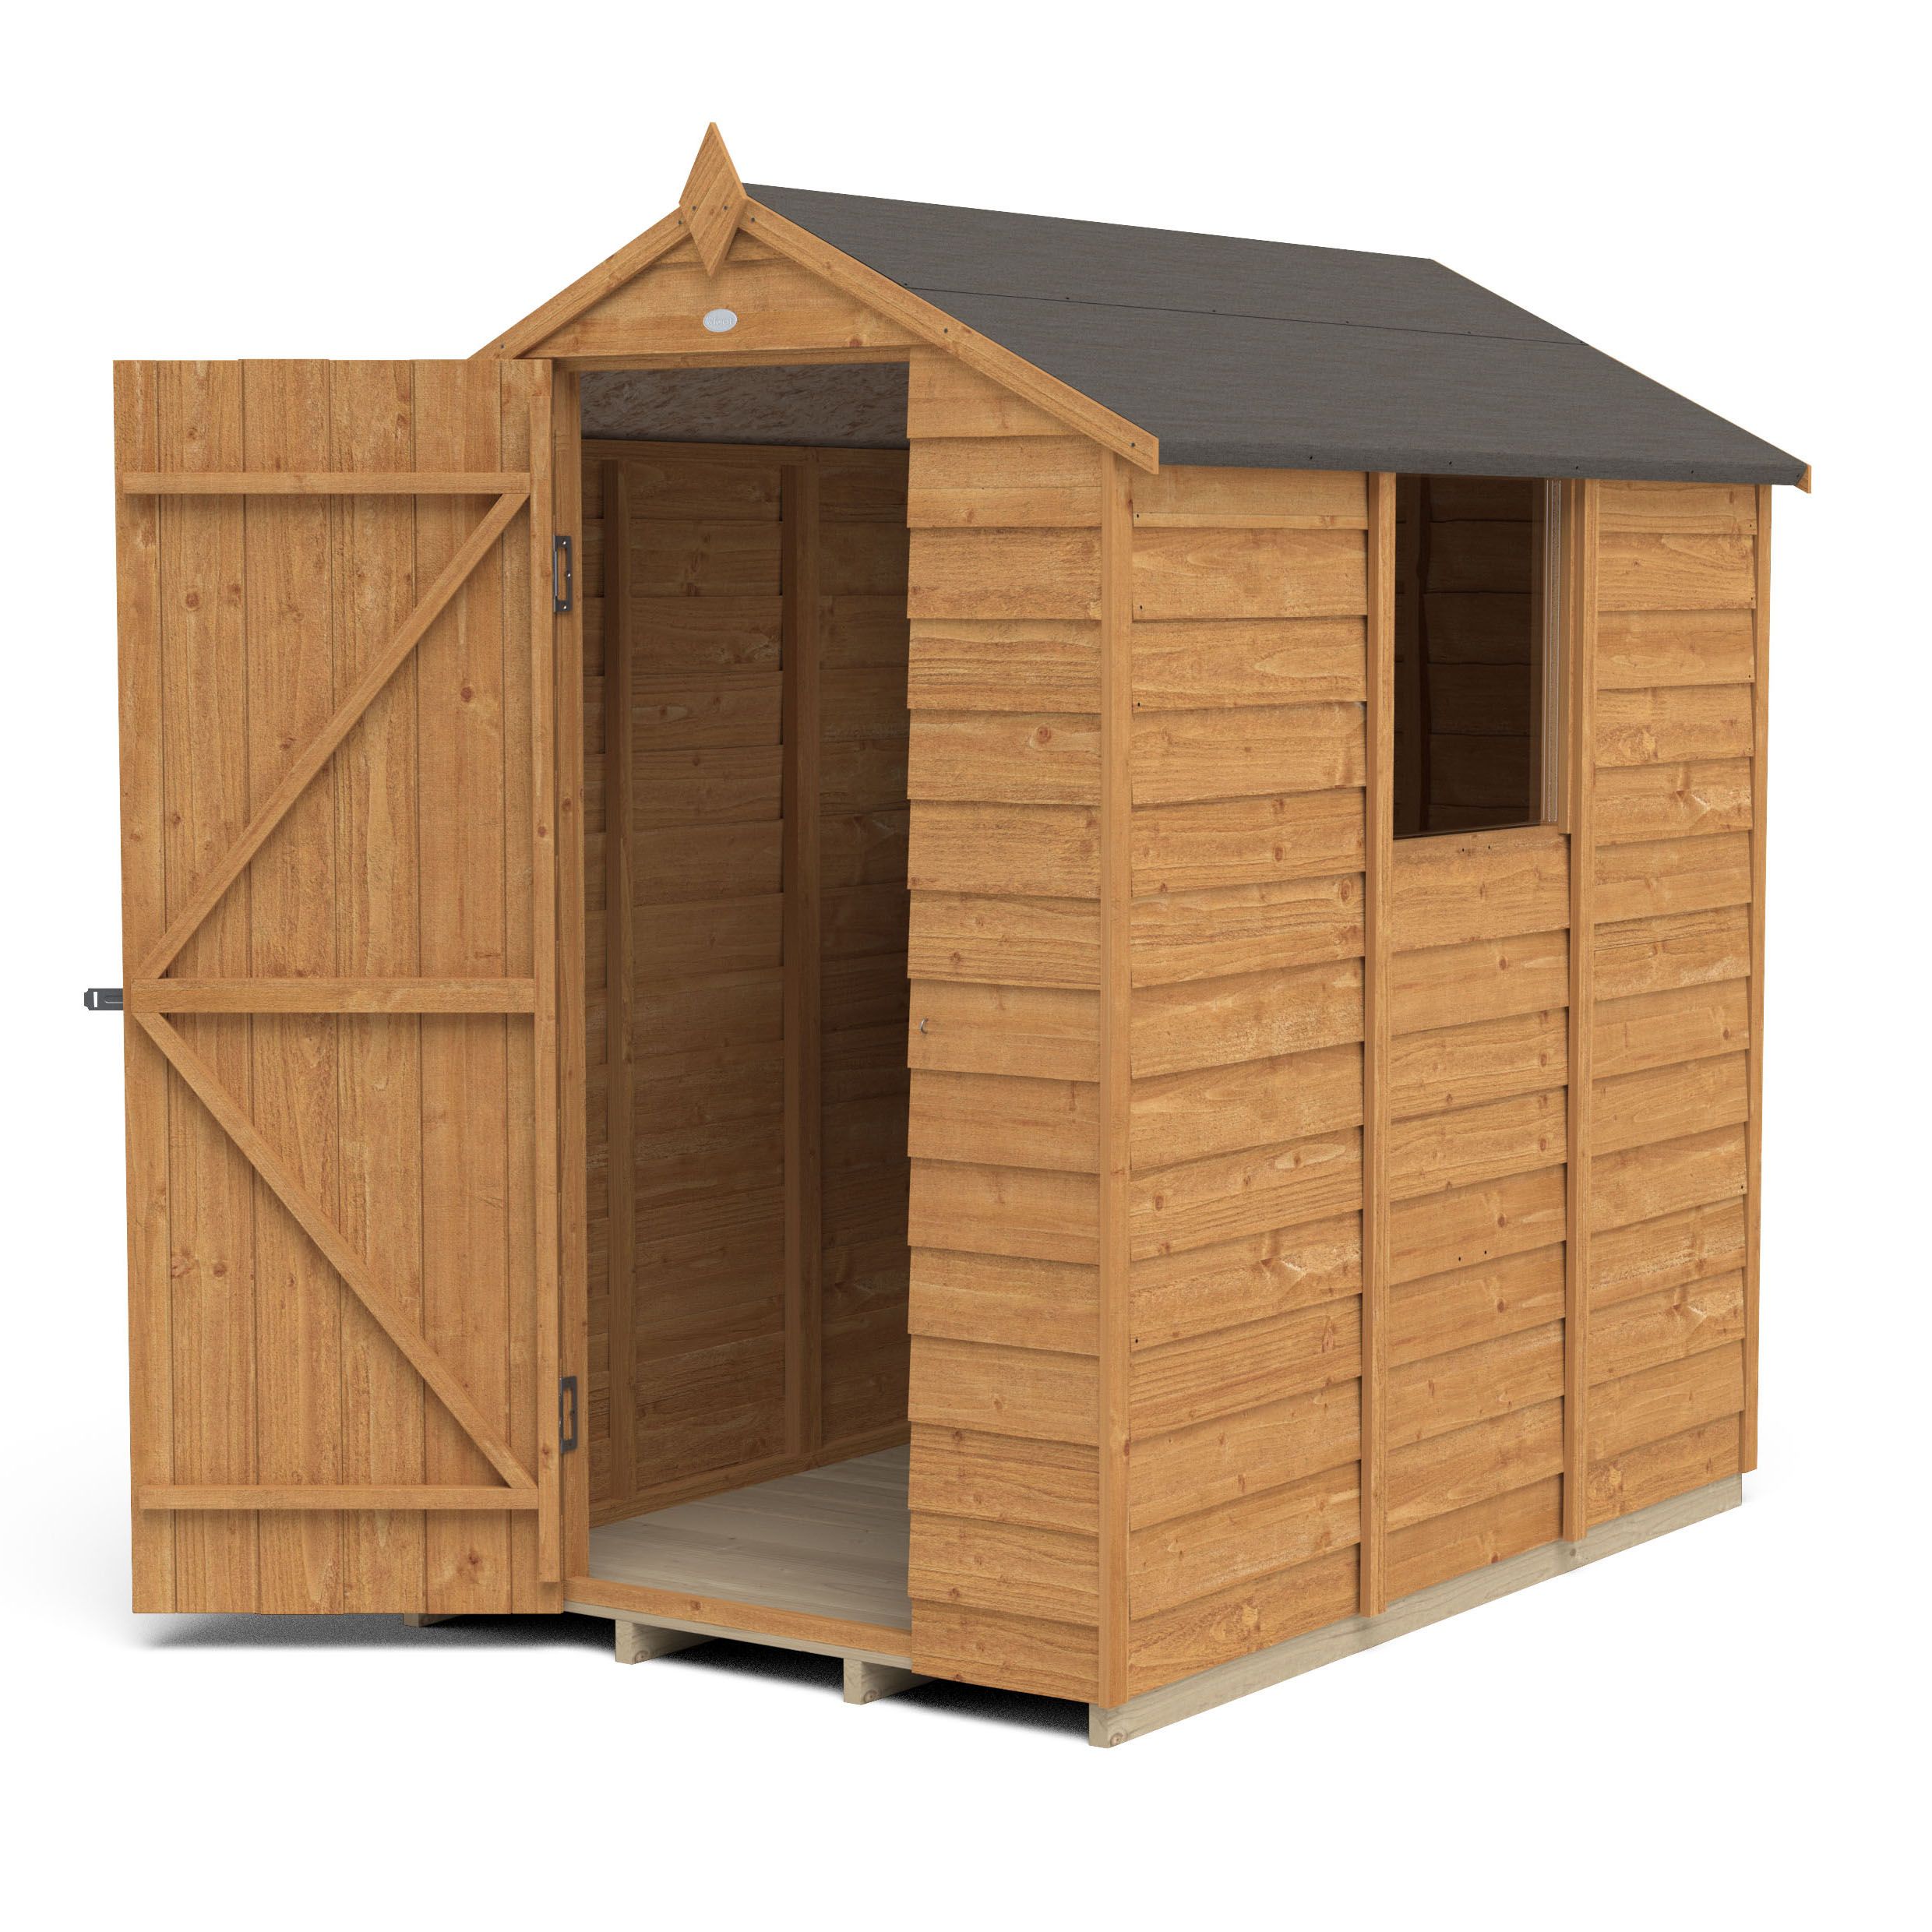 Forest Garden Overlap 6x4 ft Apex Wooden Dip treated Shed with floor & 1 window - Assembly service included